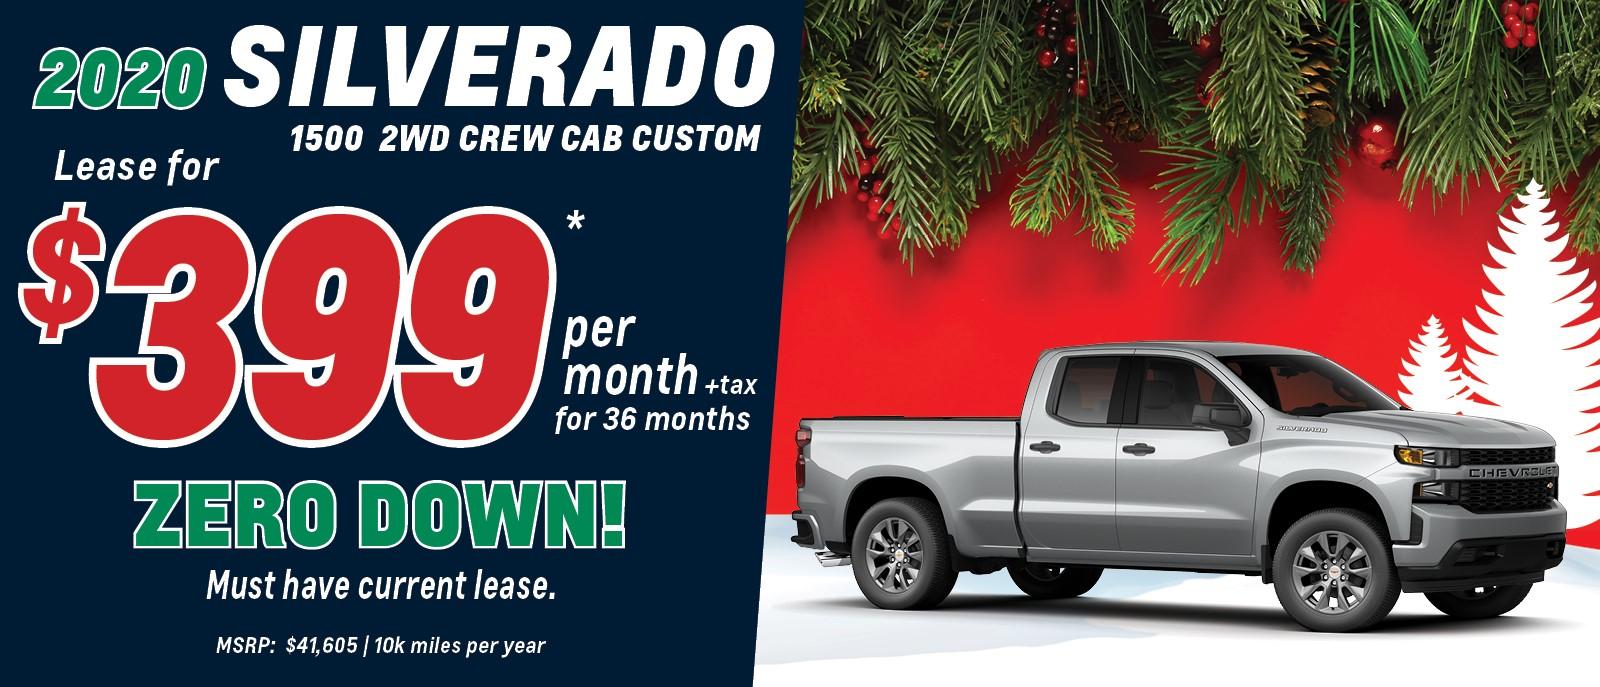 LEASE THE 2020 SILVERADO FOR ONLY $399 PER MONTH!